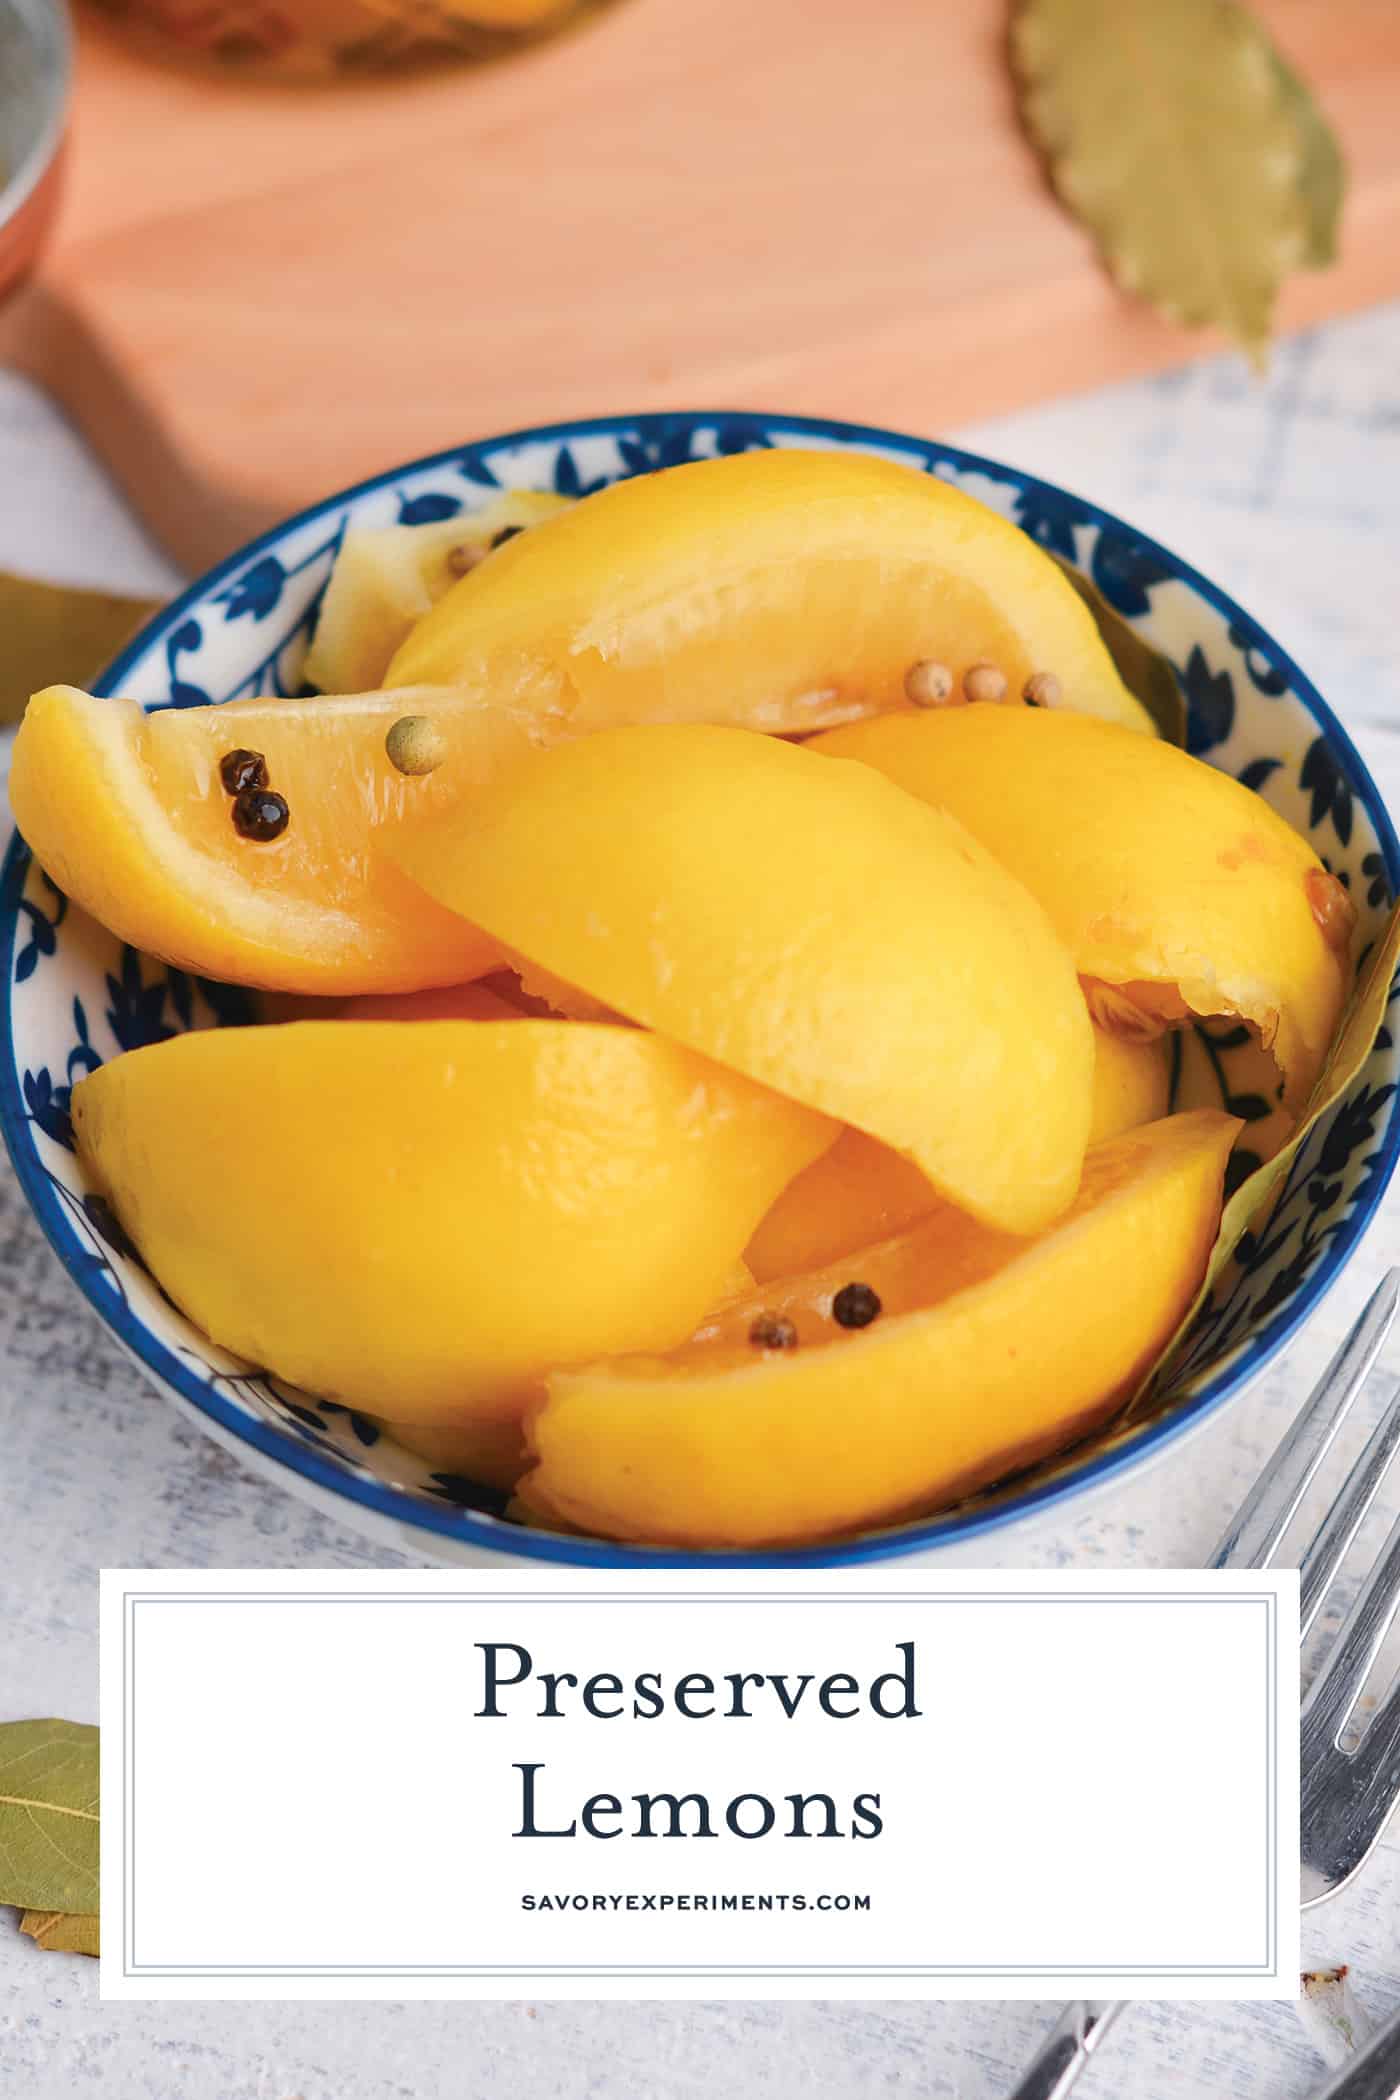 angled shot of preserved lemons in a blue bowl with text overlay for pinterest